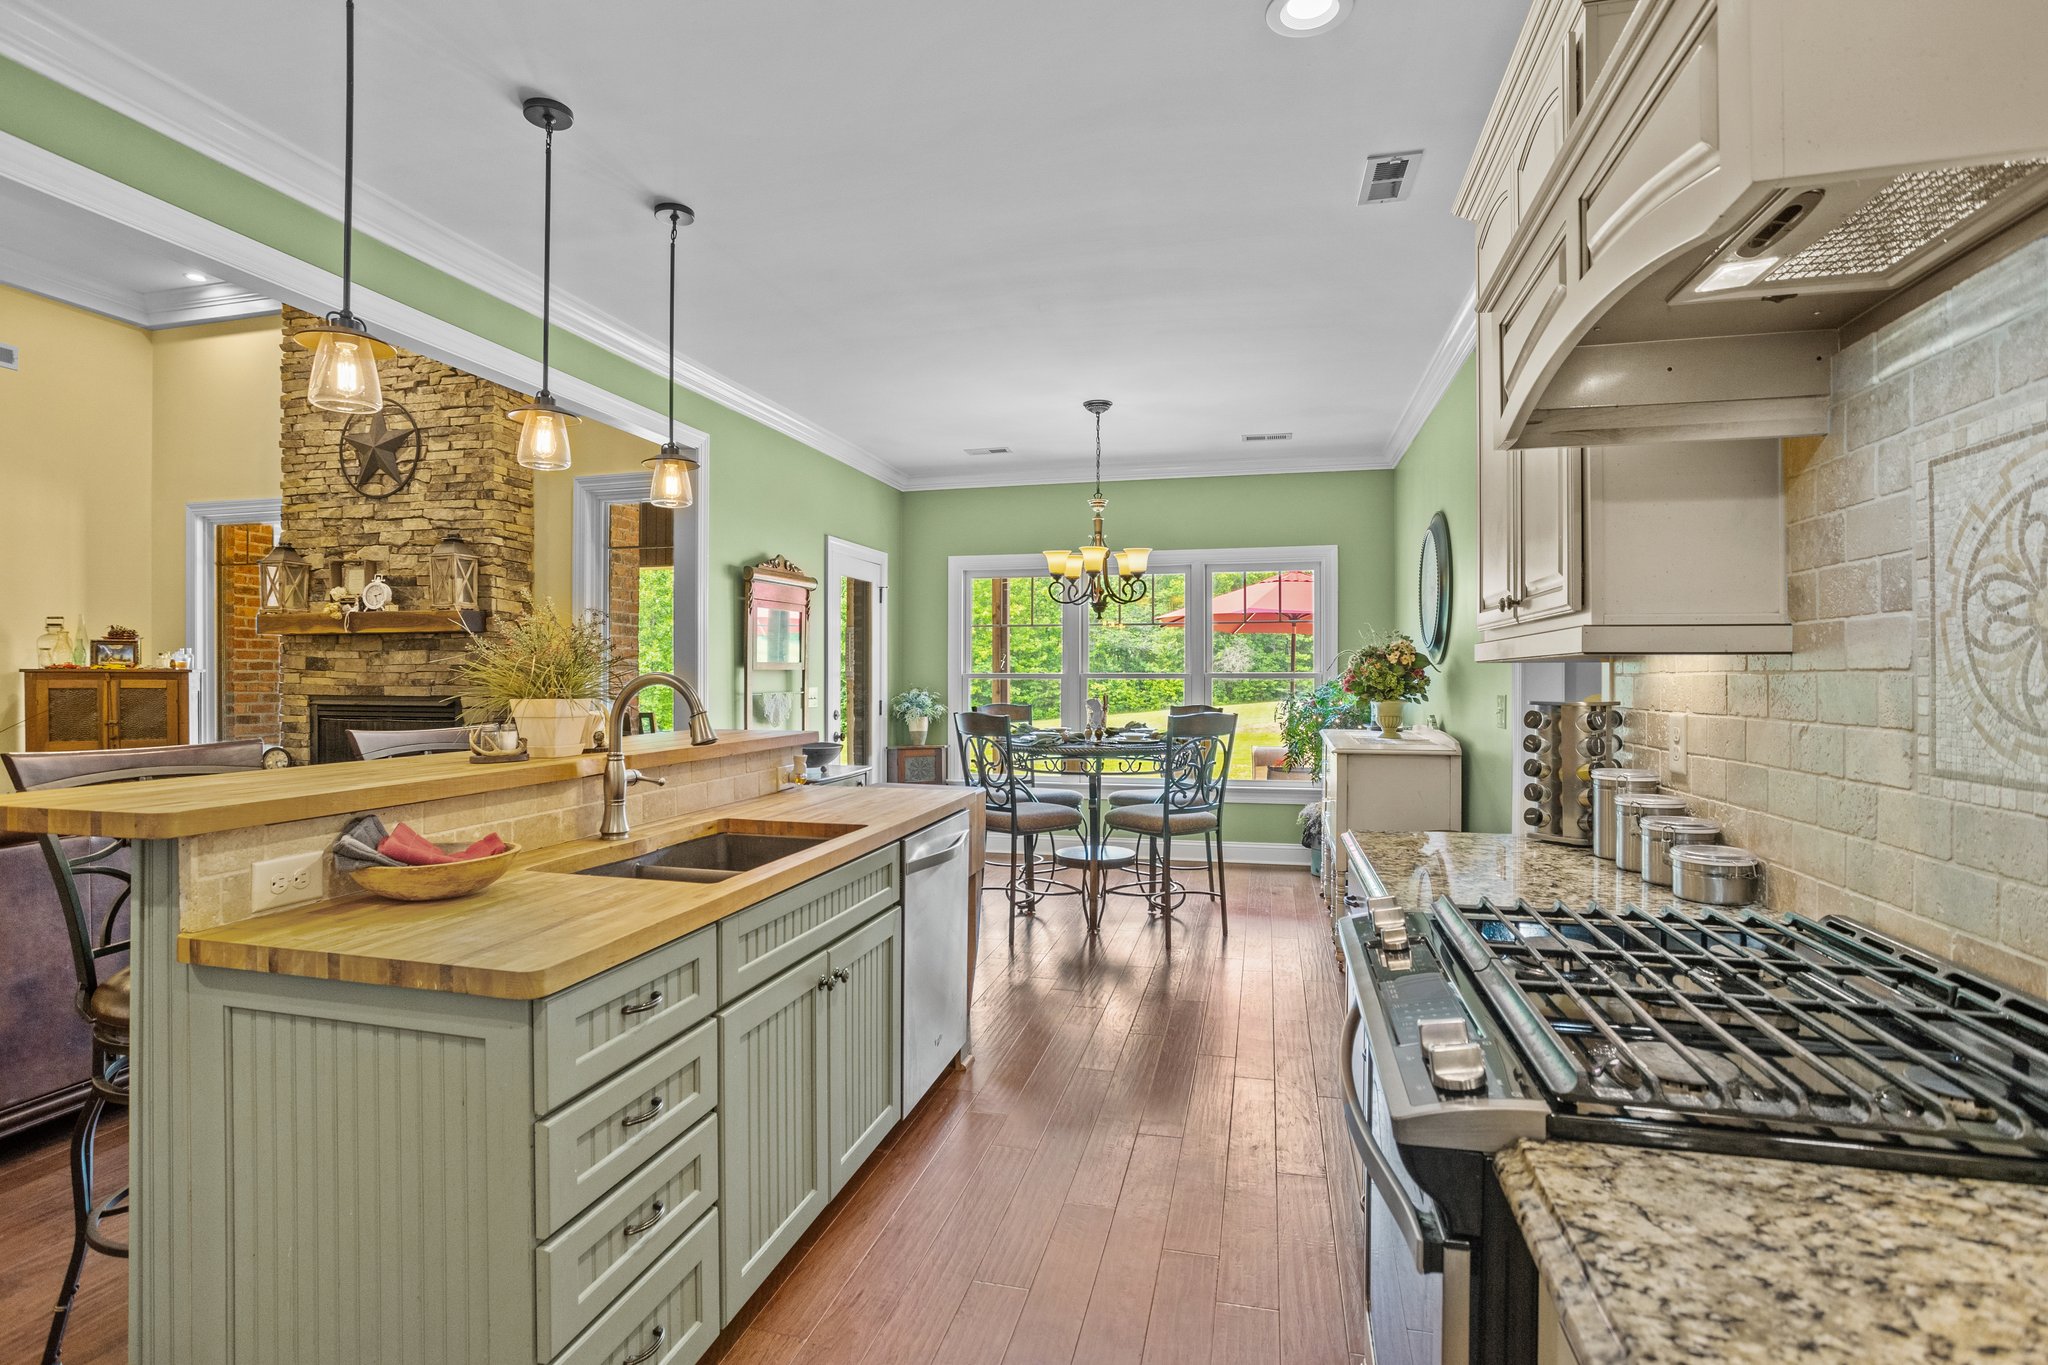 The Importance of High-Quality Images in Real Estate: Selling More Than Just Homes